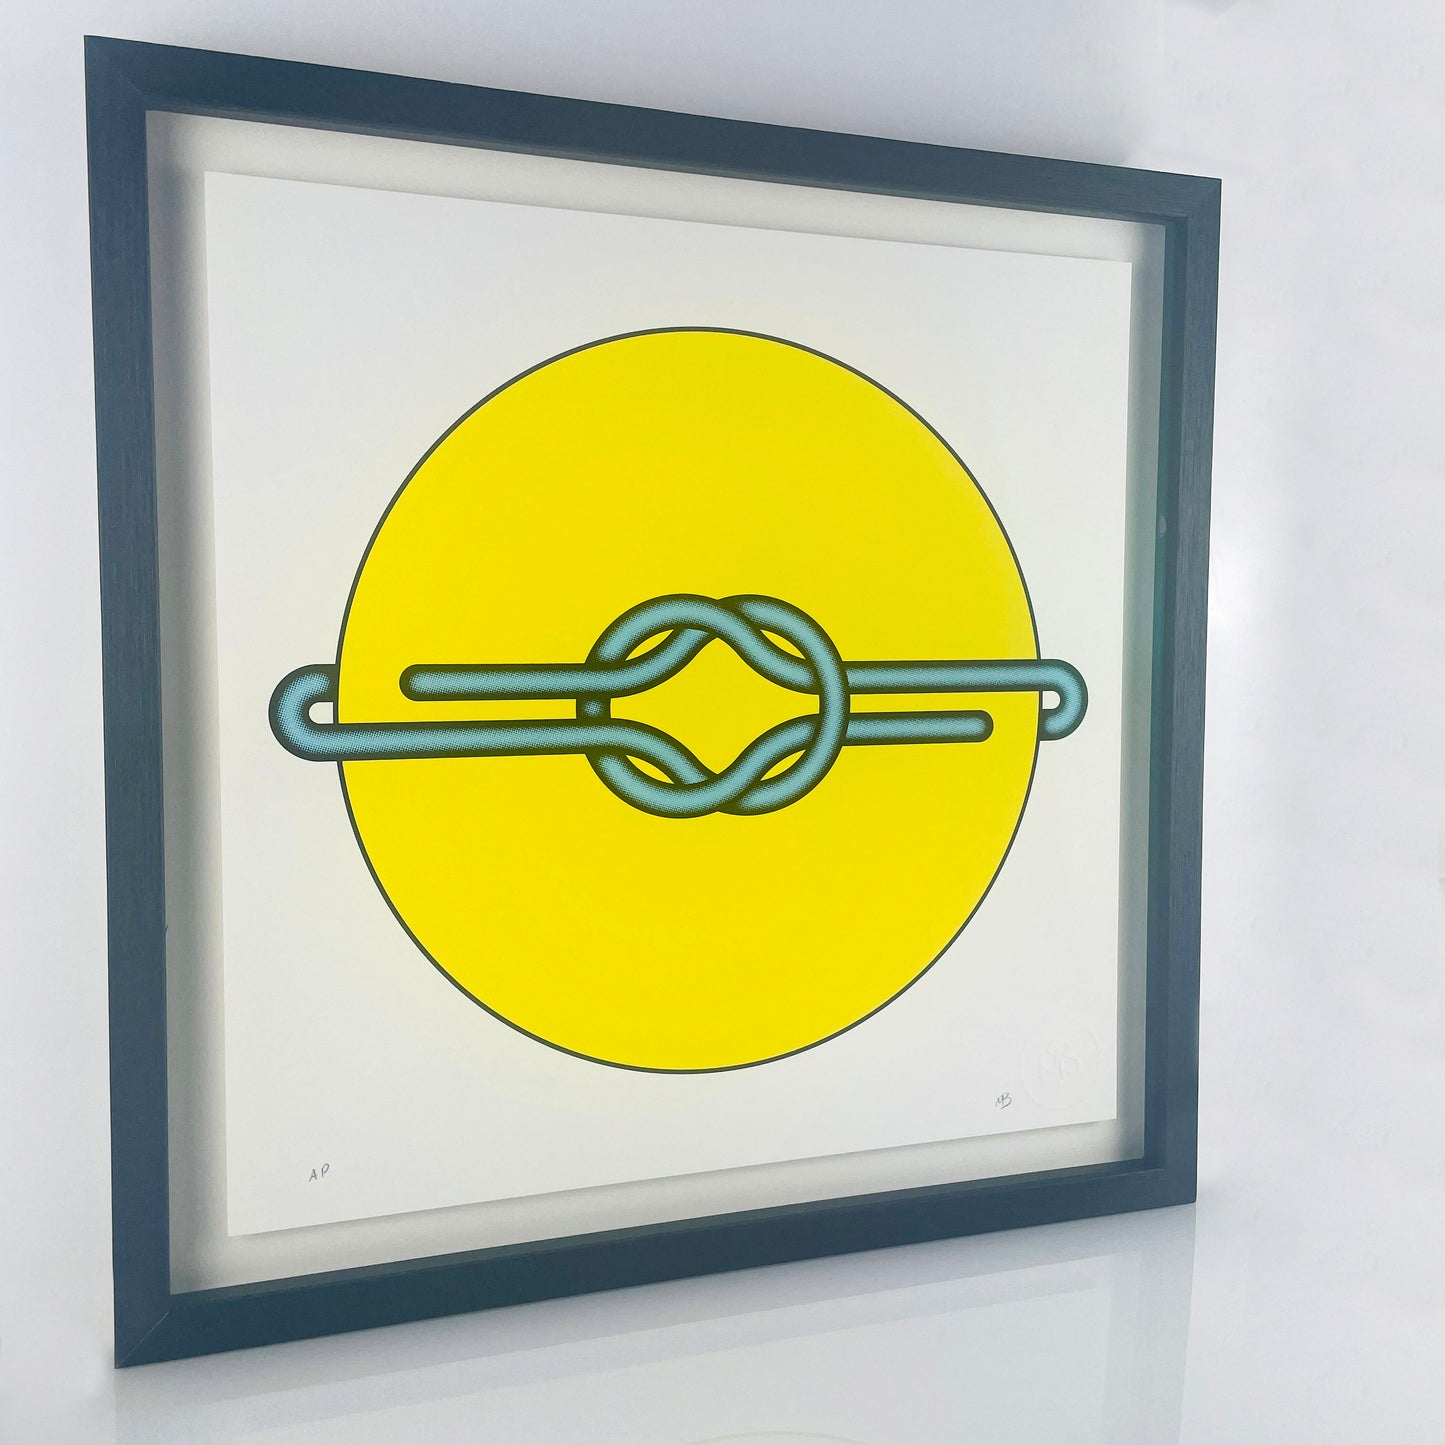 Immerse your space in the vibrant charm of Mark Beattie's Love Knot (Blue in Yellow). This limited edition 3-color screenprint on Somerset satin white 410gsm paper, measuring 40 x 40cm, is part of an exclusive edition of 10. Explore the dynamic interplay of colors and forms, where artistic precision meets limited edition exclusivity